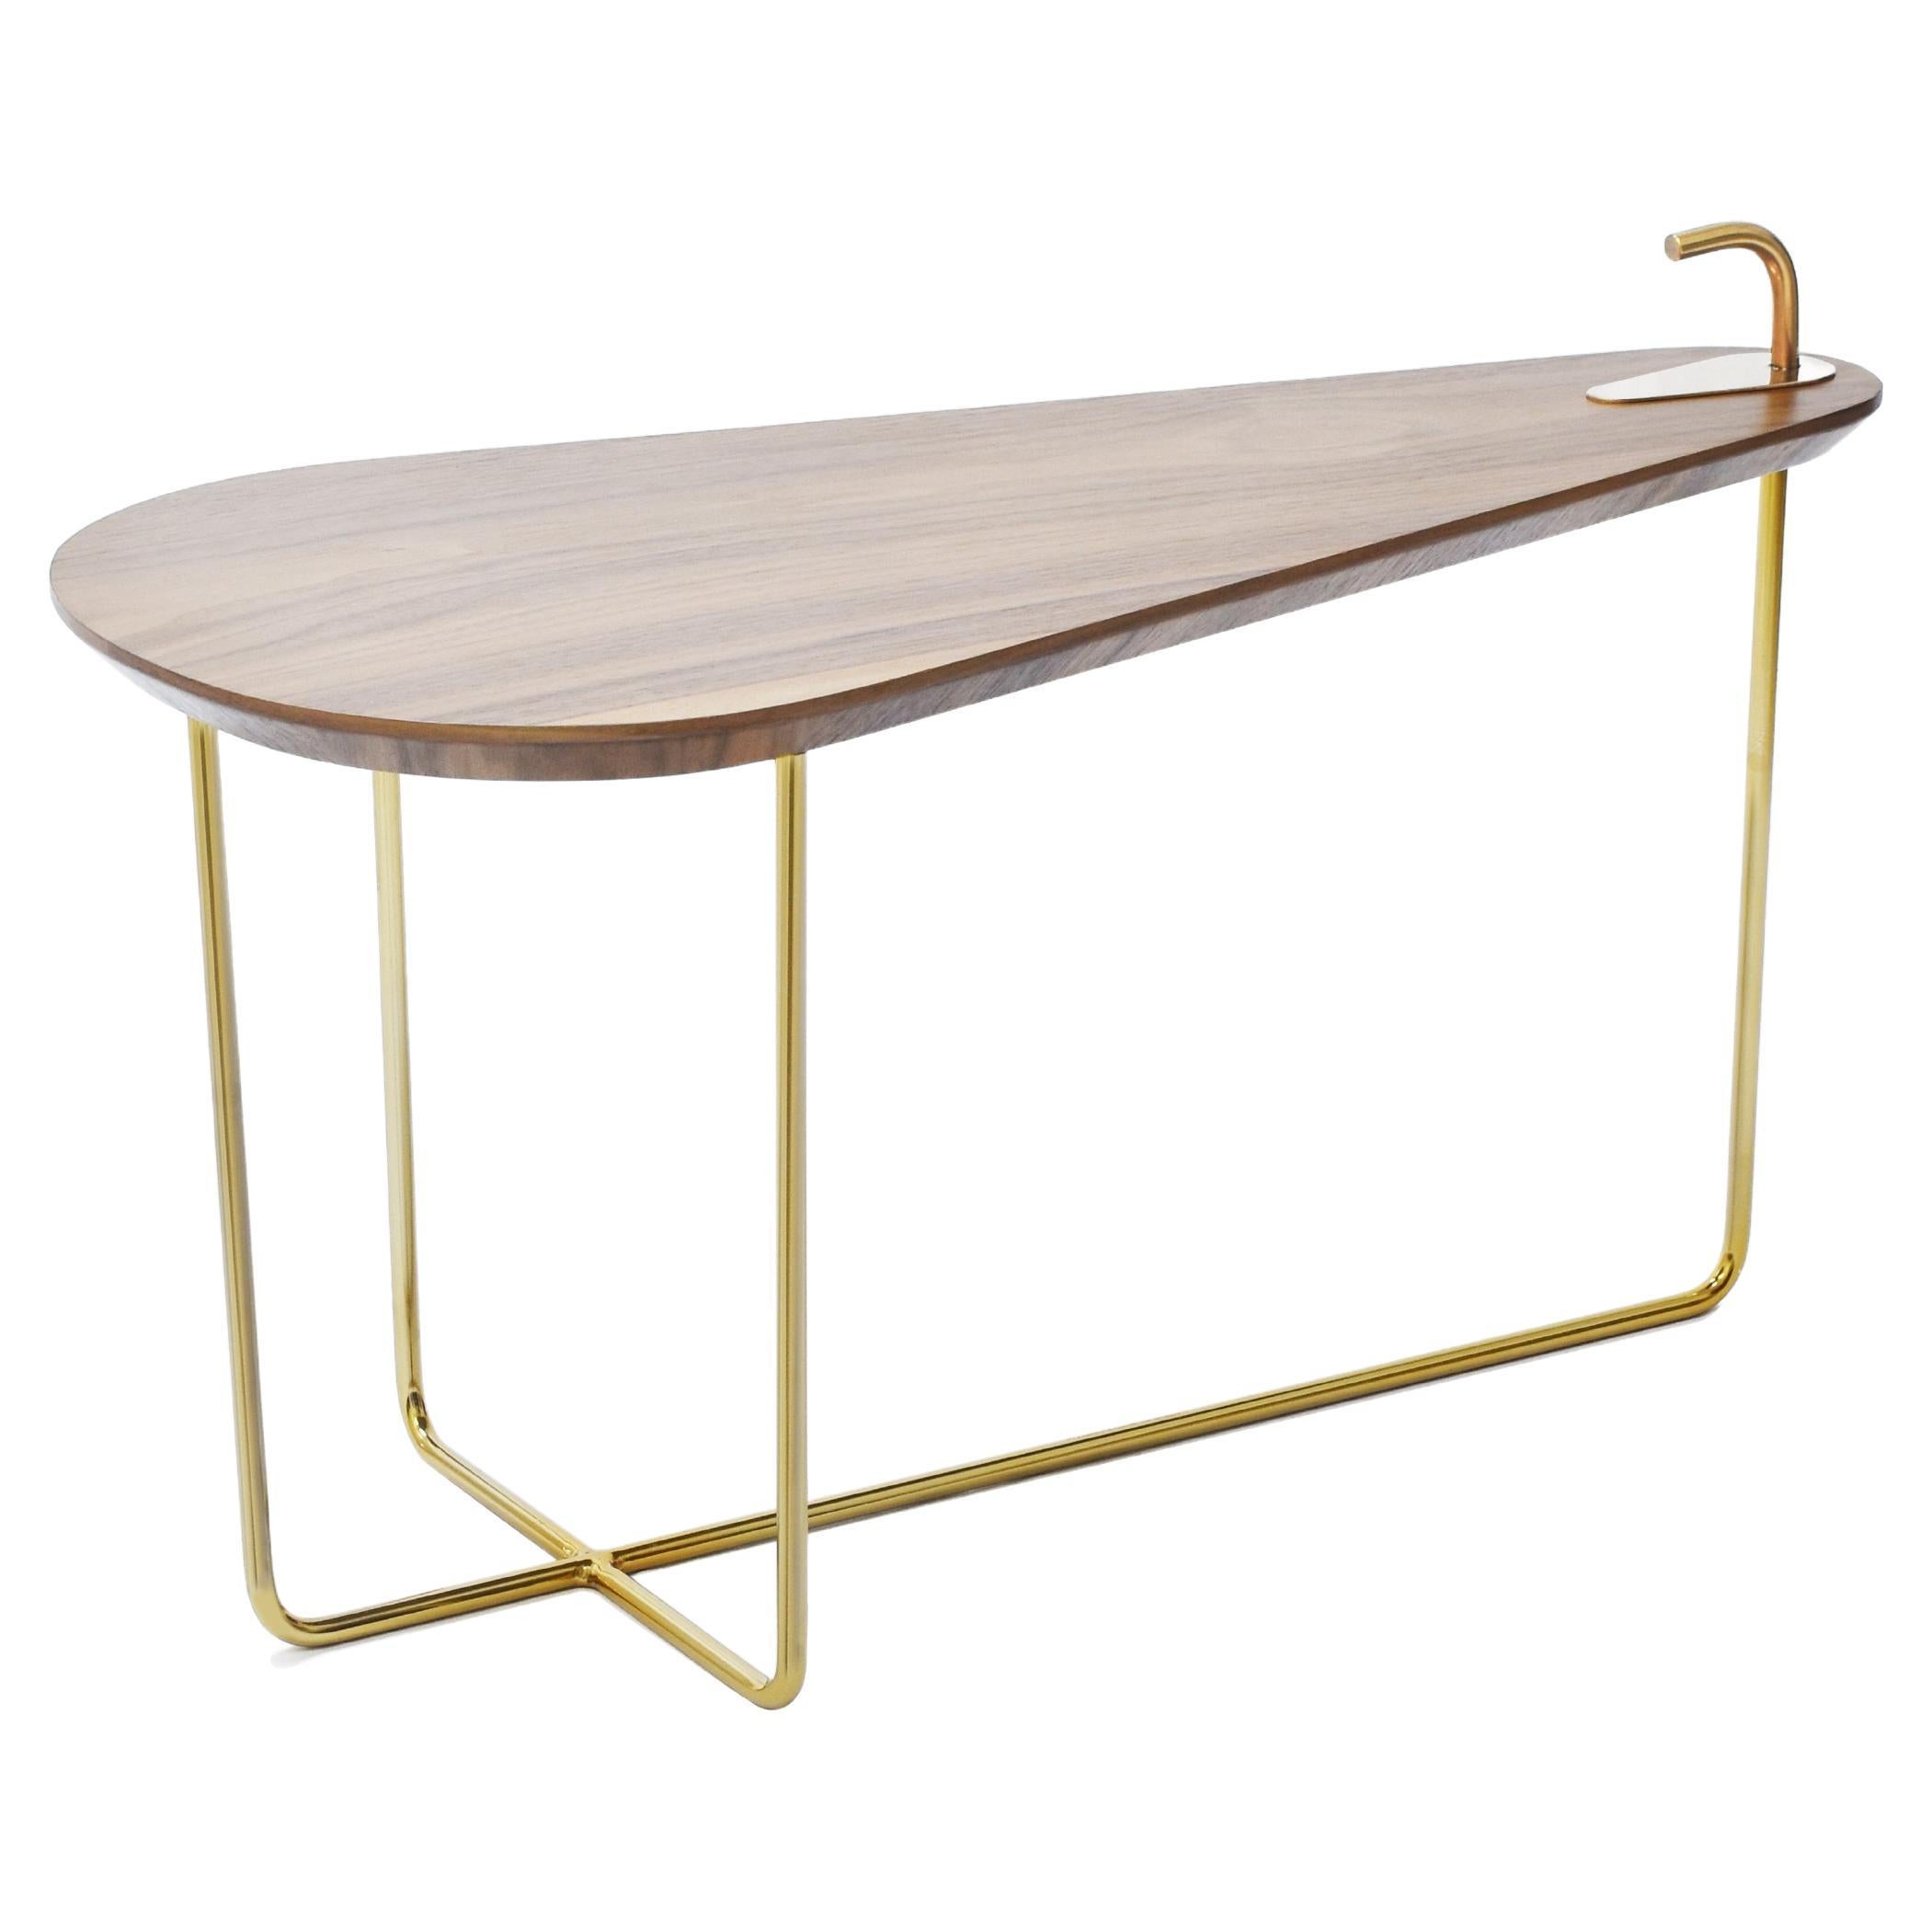 "Leaf" Center Table in Golden Carbon Steel and Top in Natural Walnut Wood Veneer